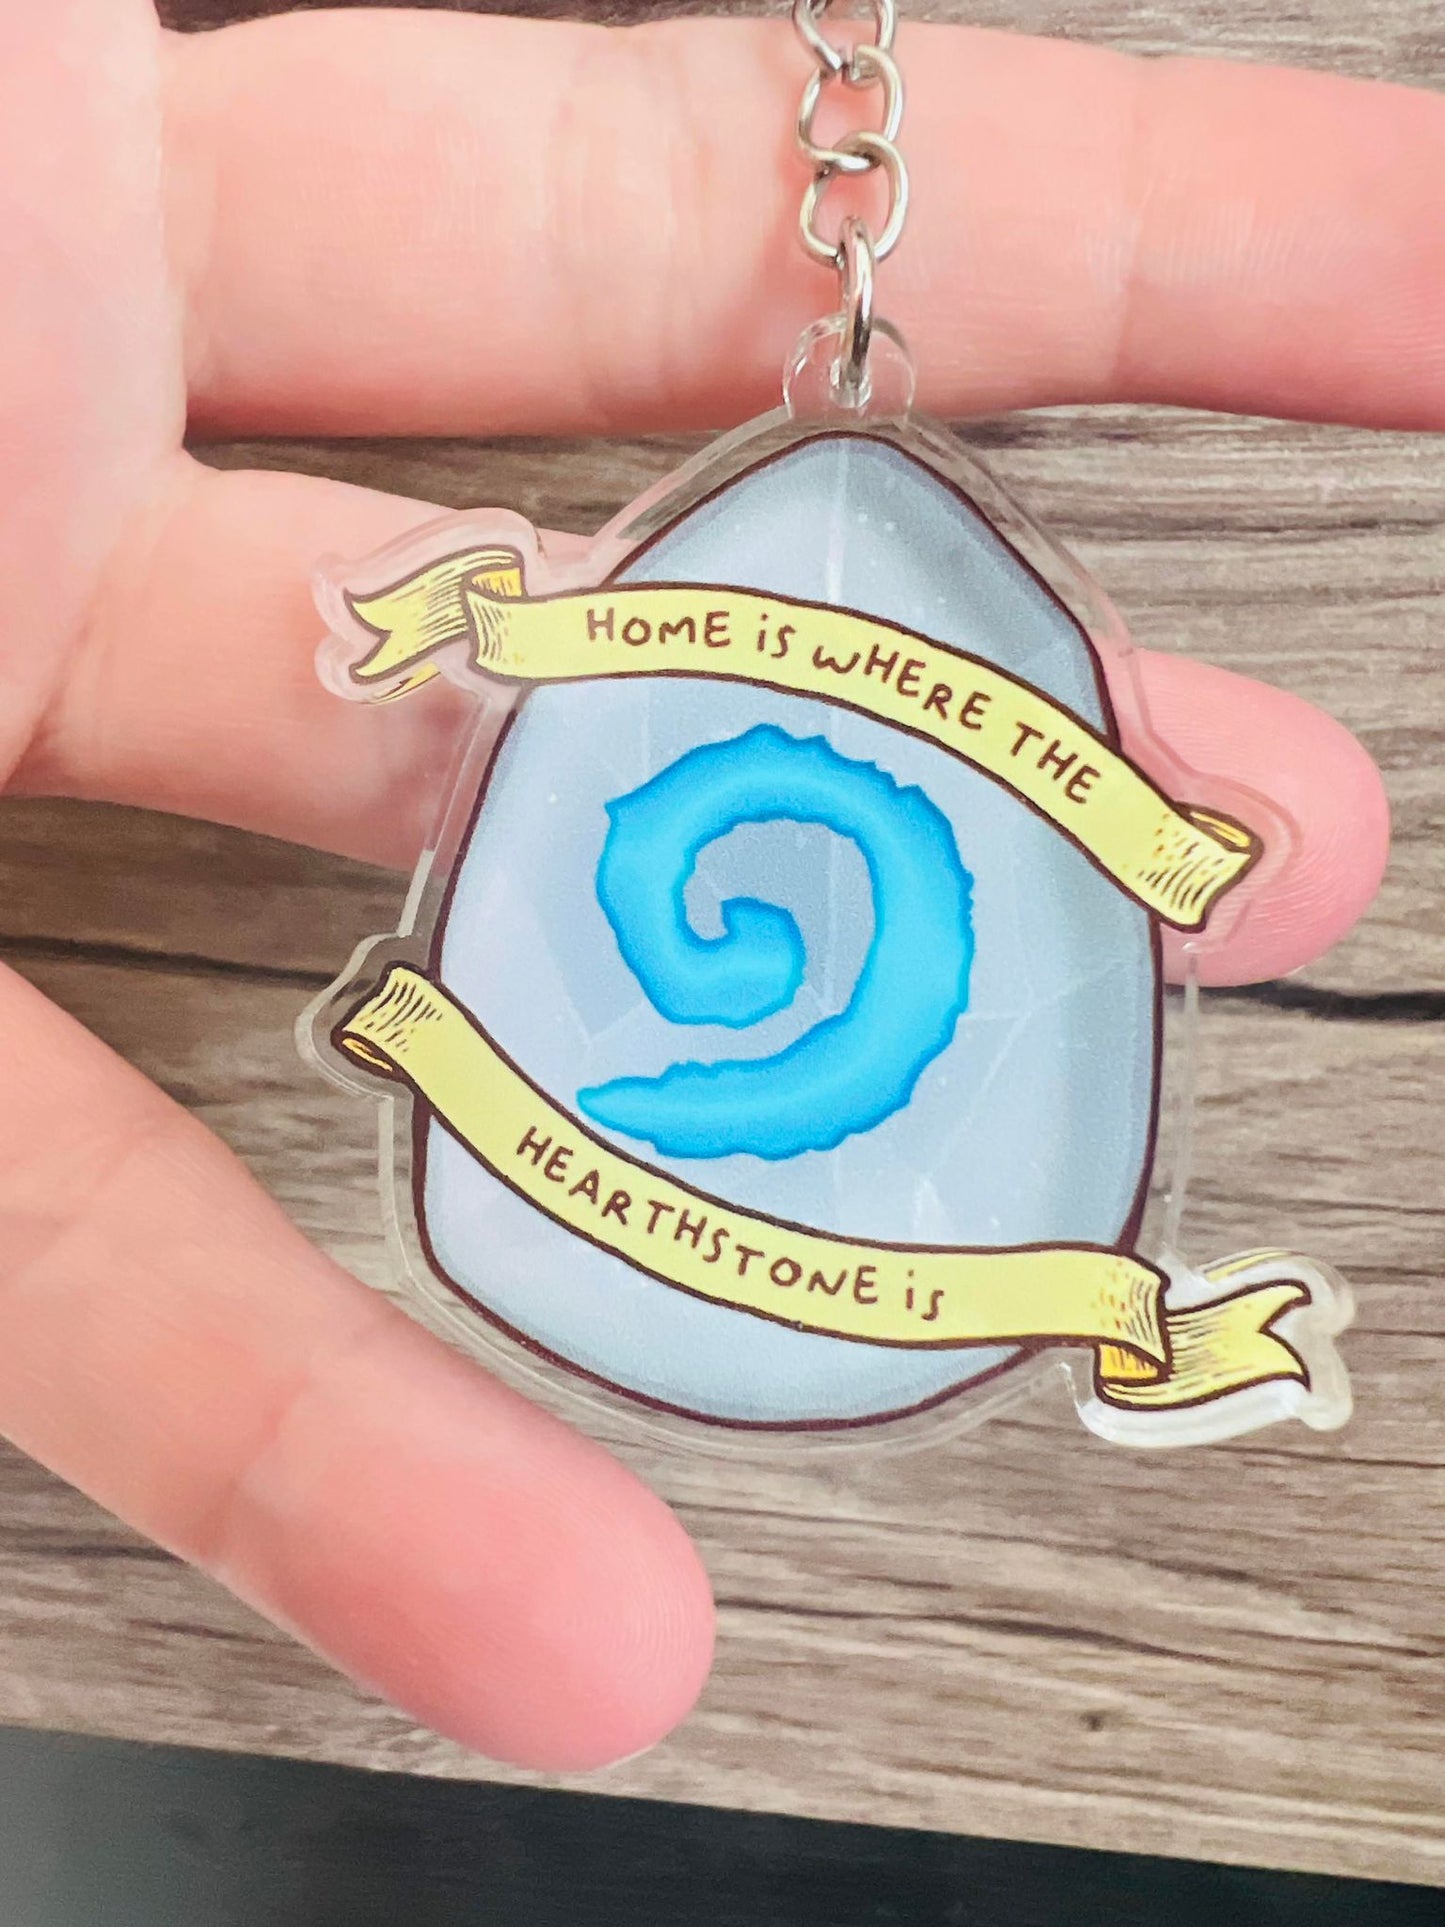 home is where the hearthstone is keychain